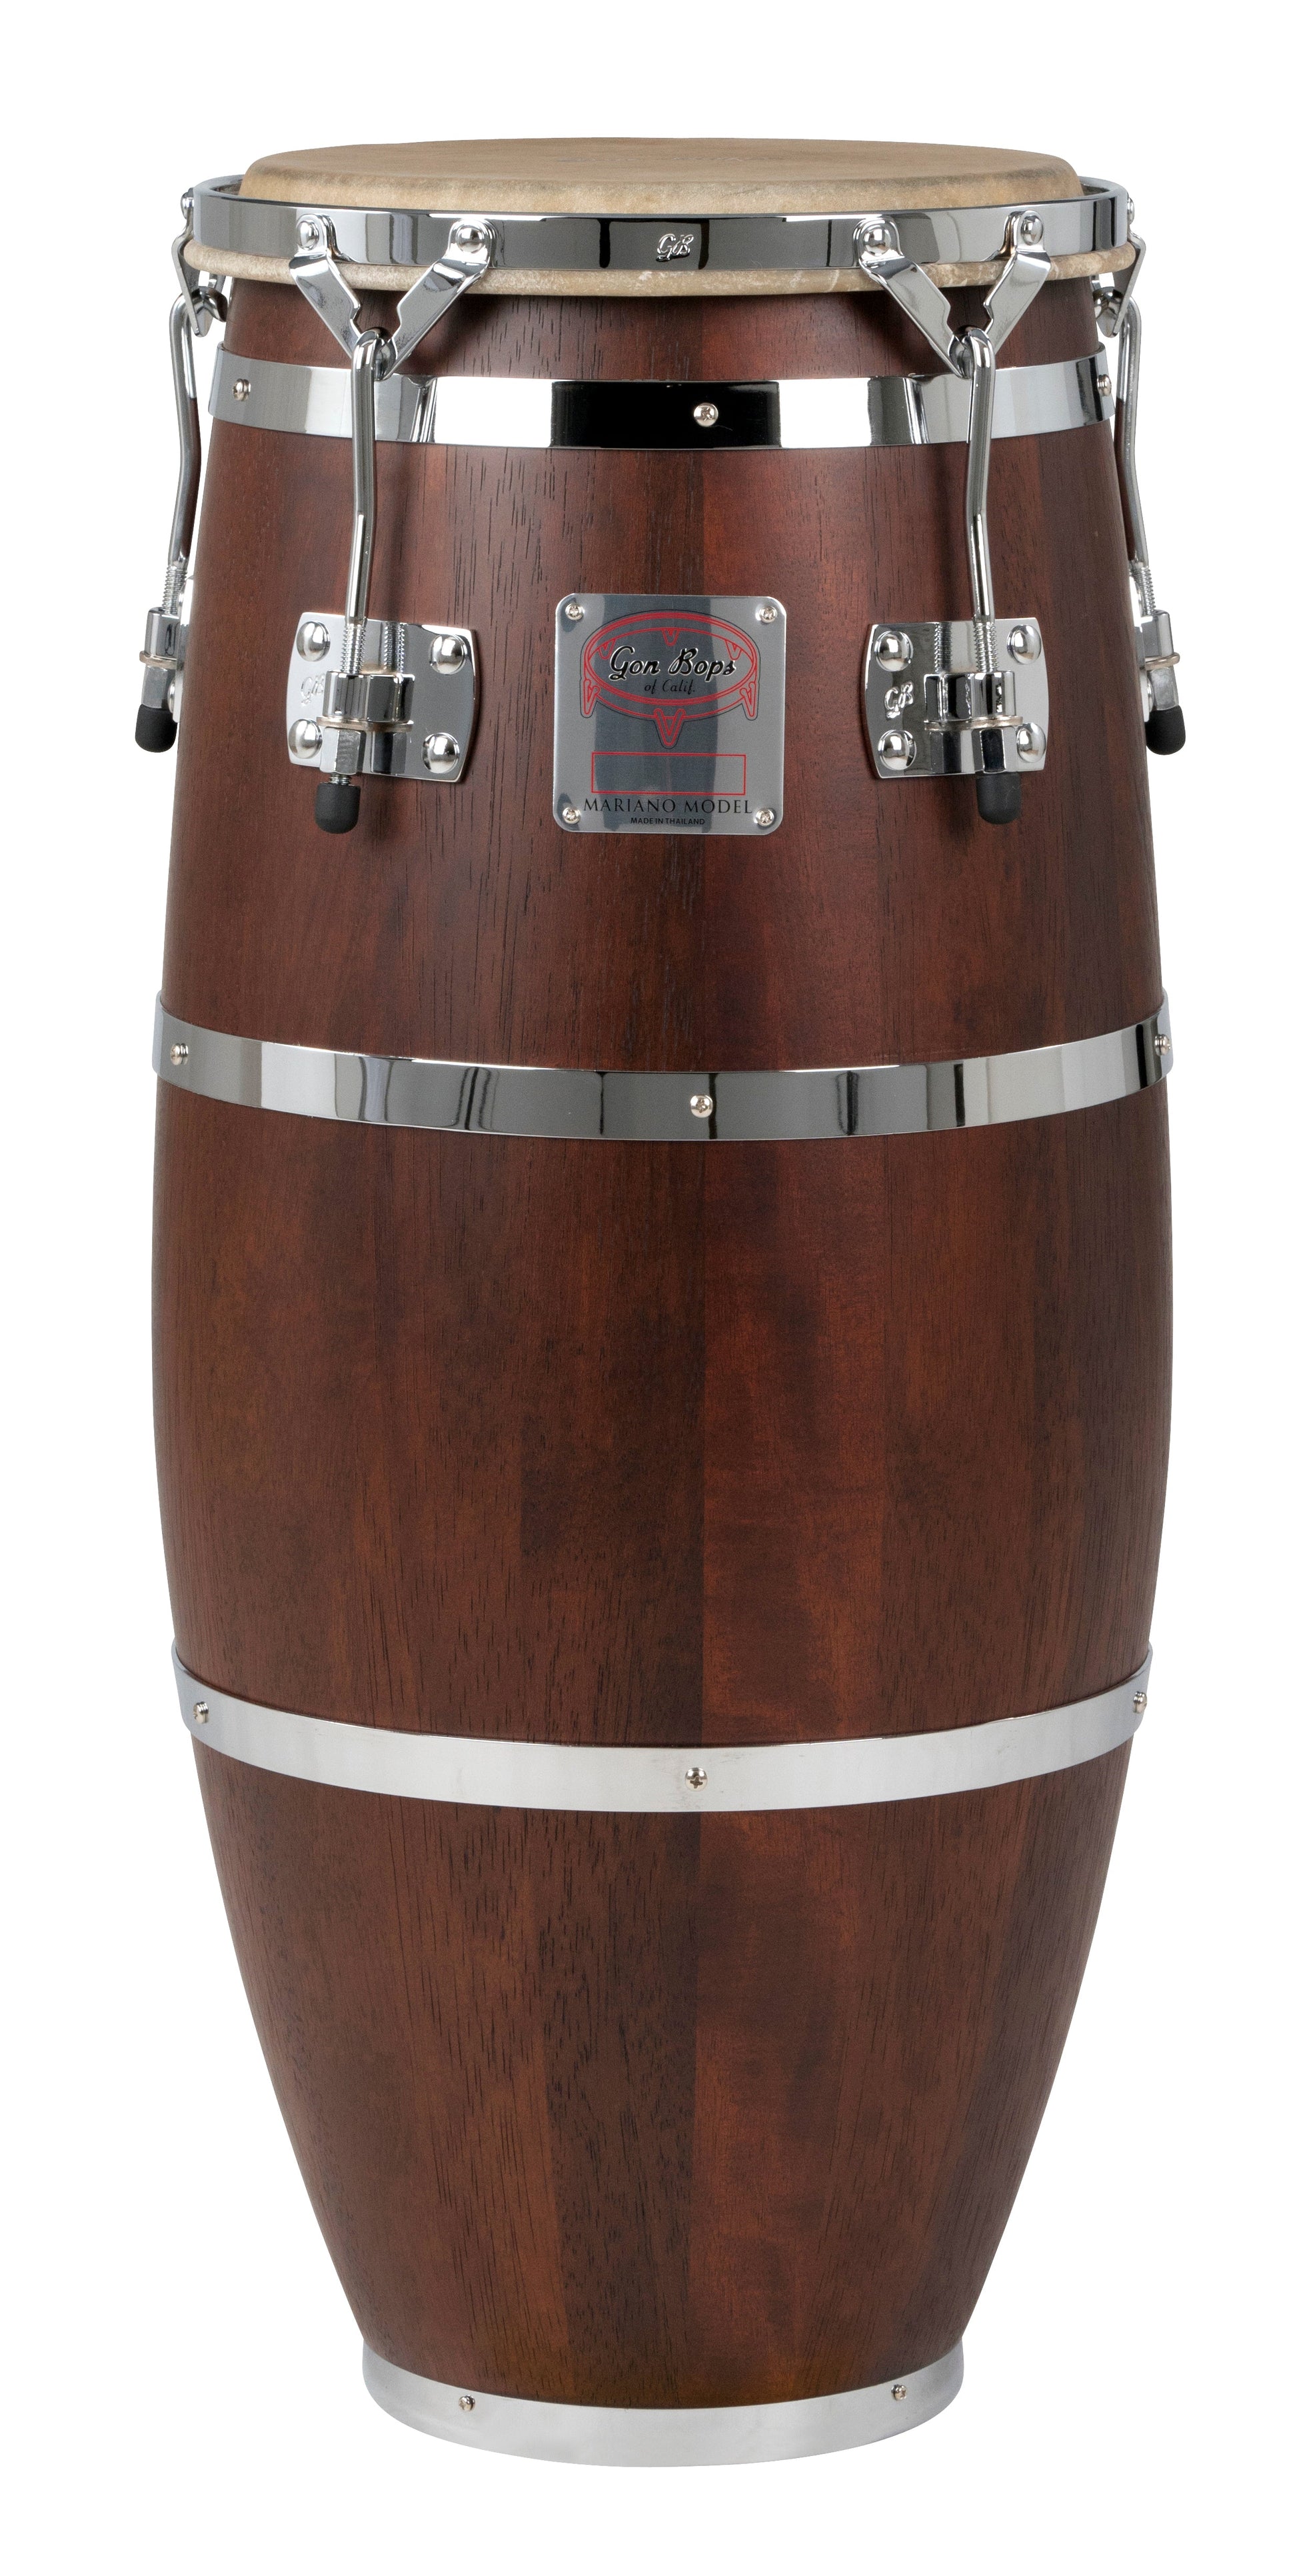 Gon Bops Mariano Series Congas